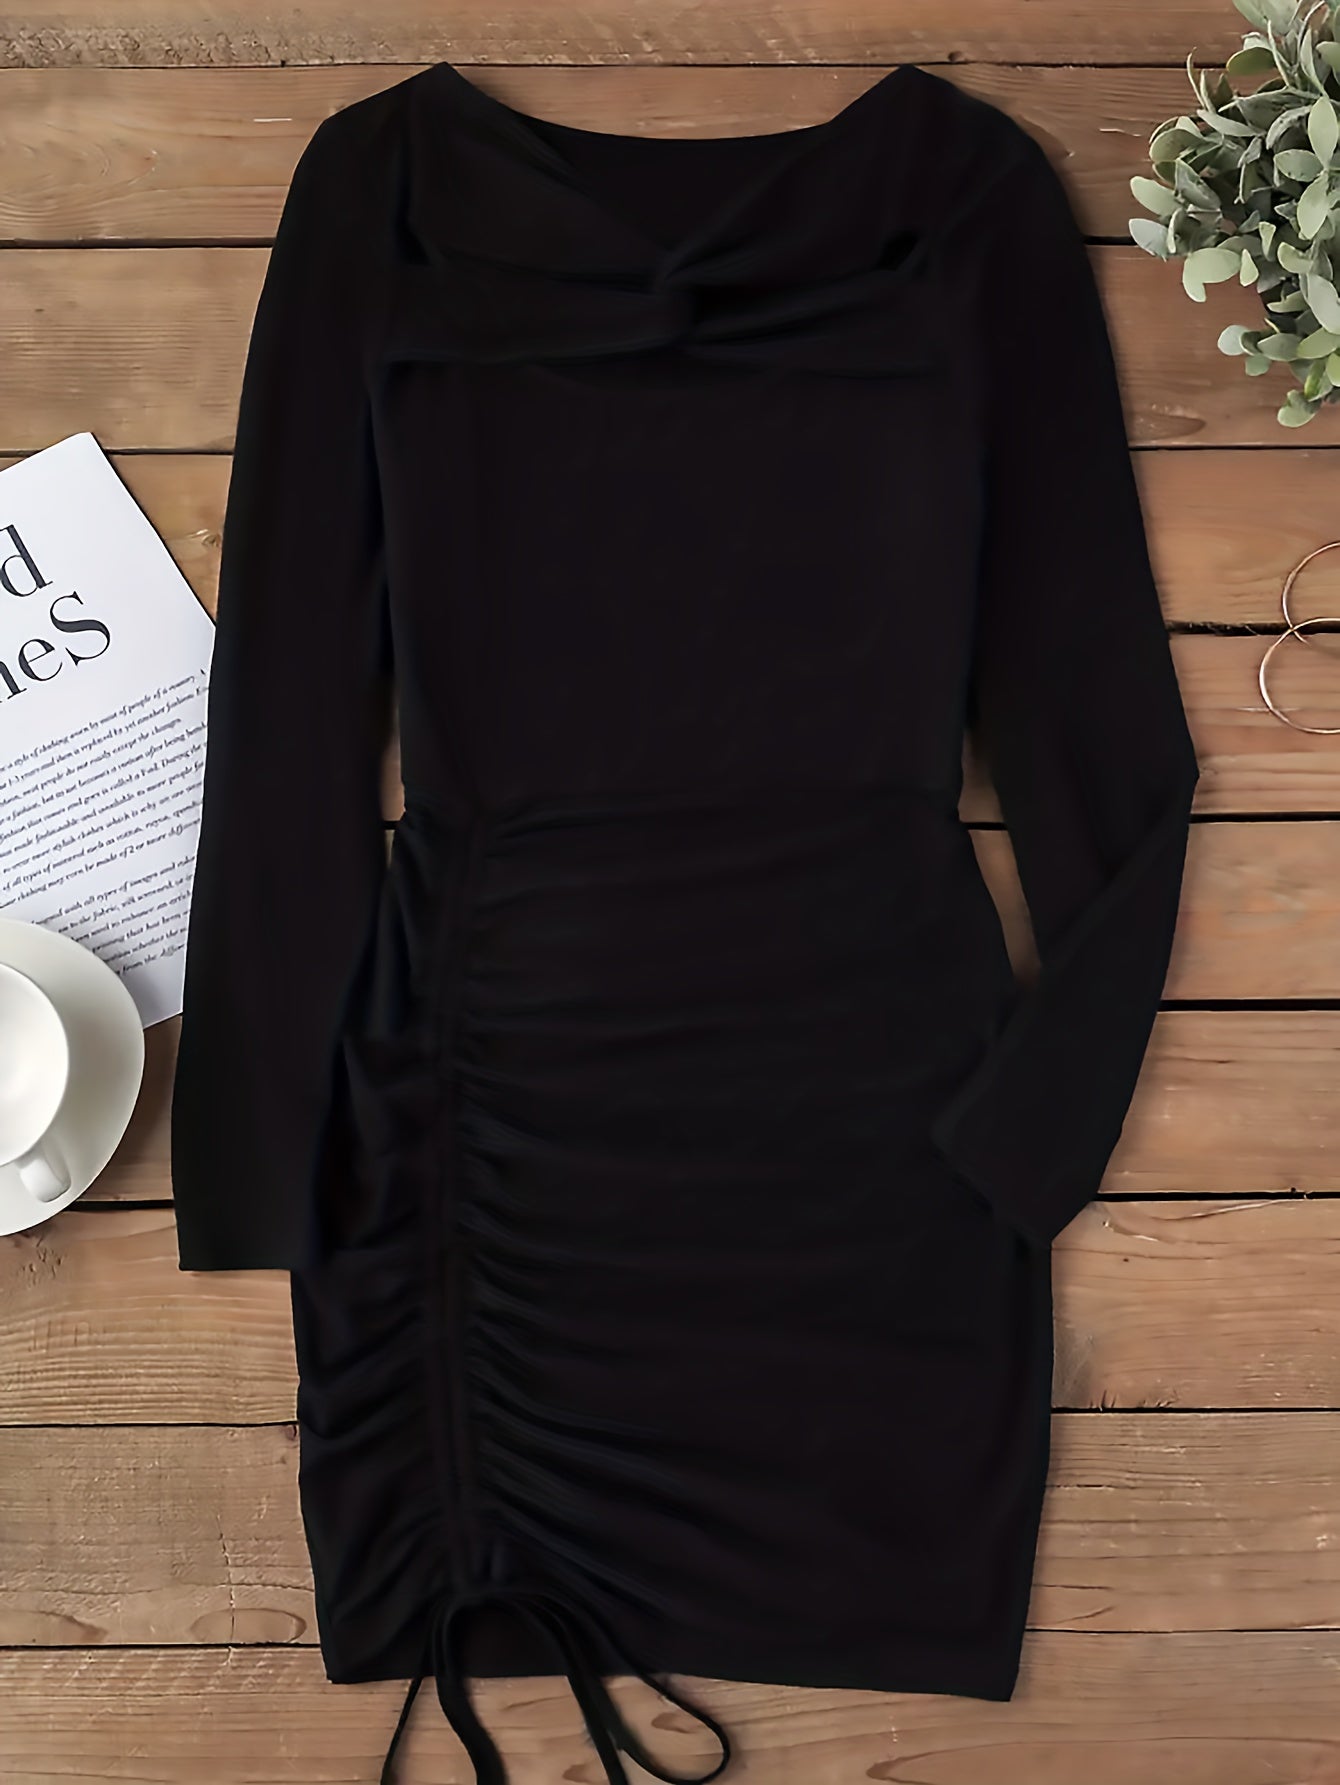 hoombox Cut Out Drawstring Dress, Party Wear Long Sleeve Bodycon Solid Dress, Women's Clothing